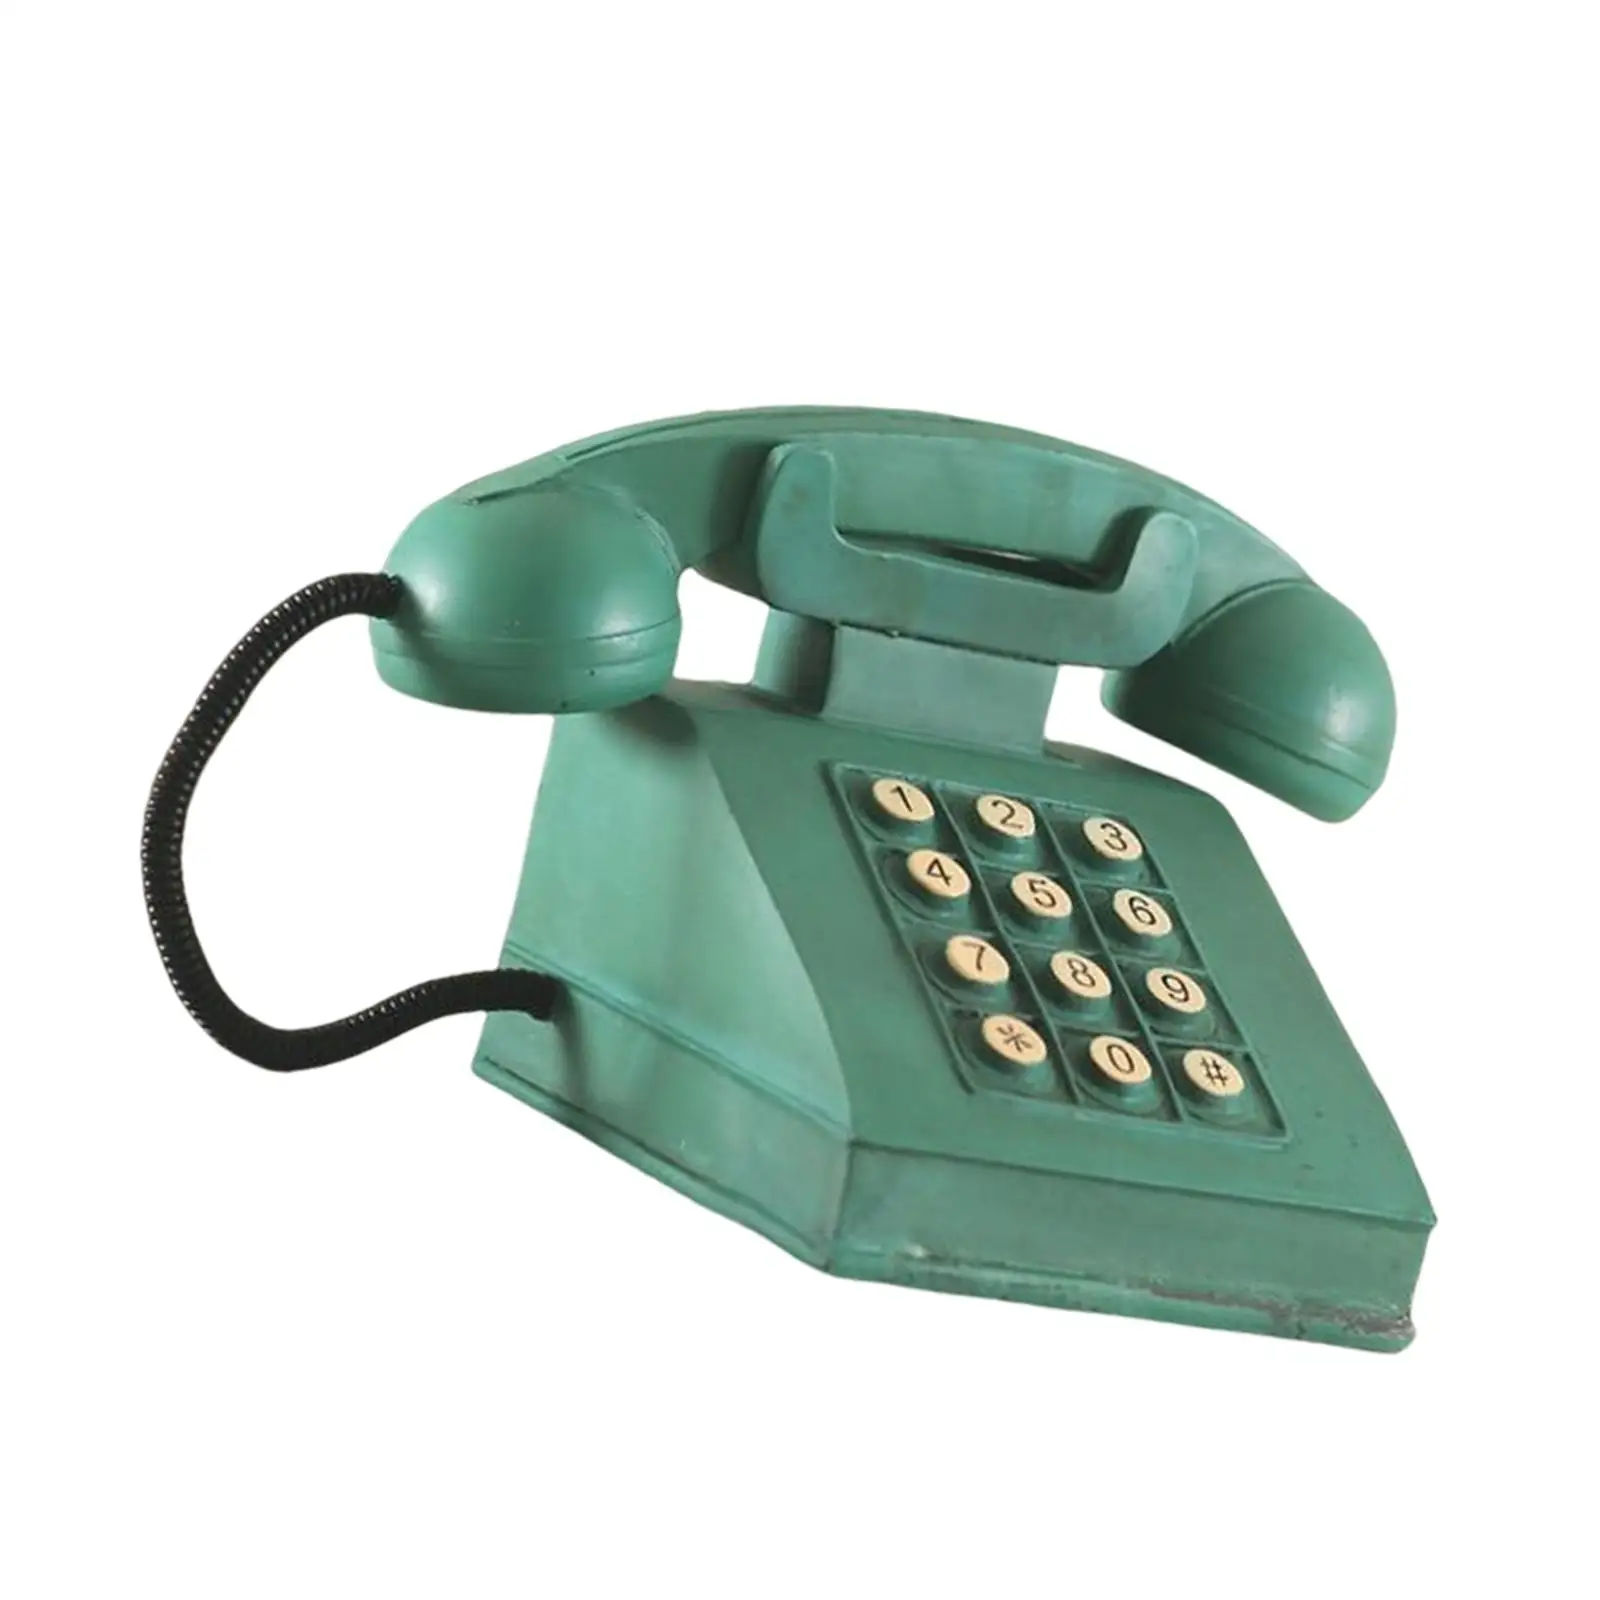 Retro Style American Telephone Model Statue Resin Craft for Office